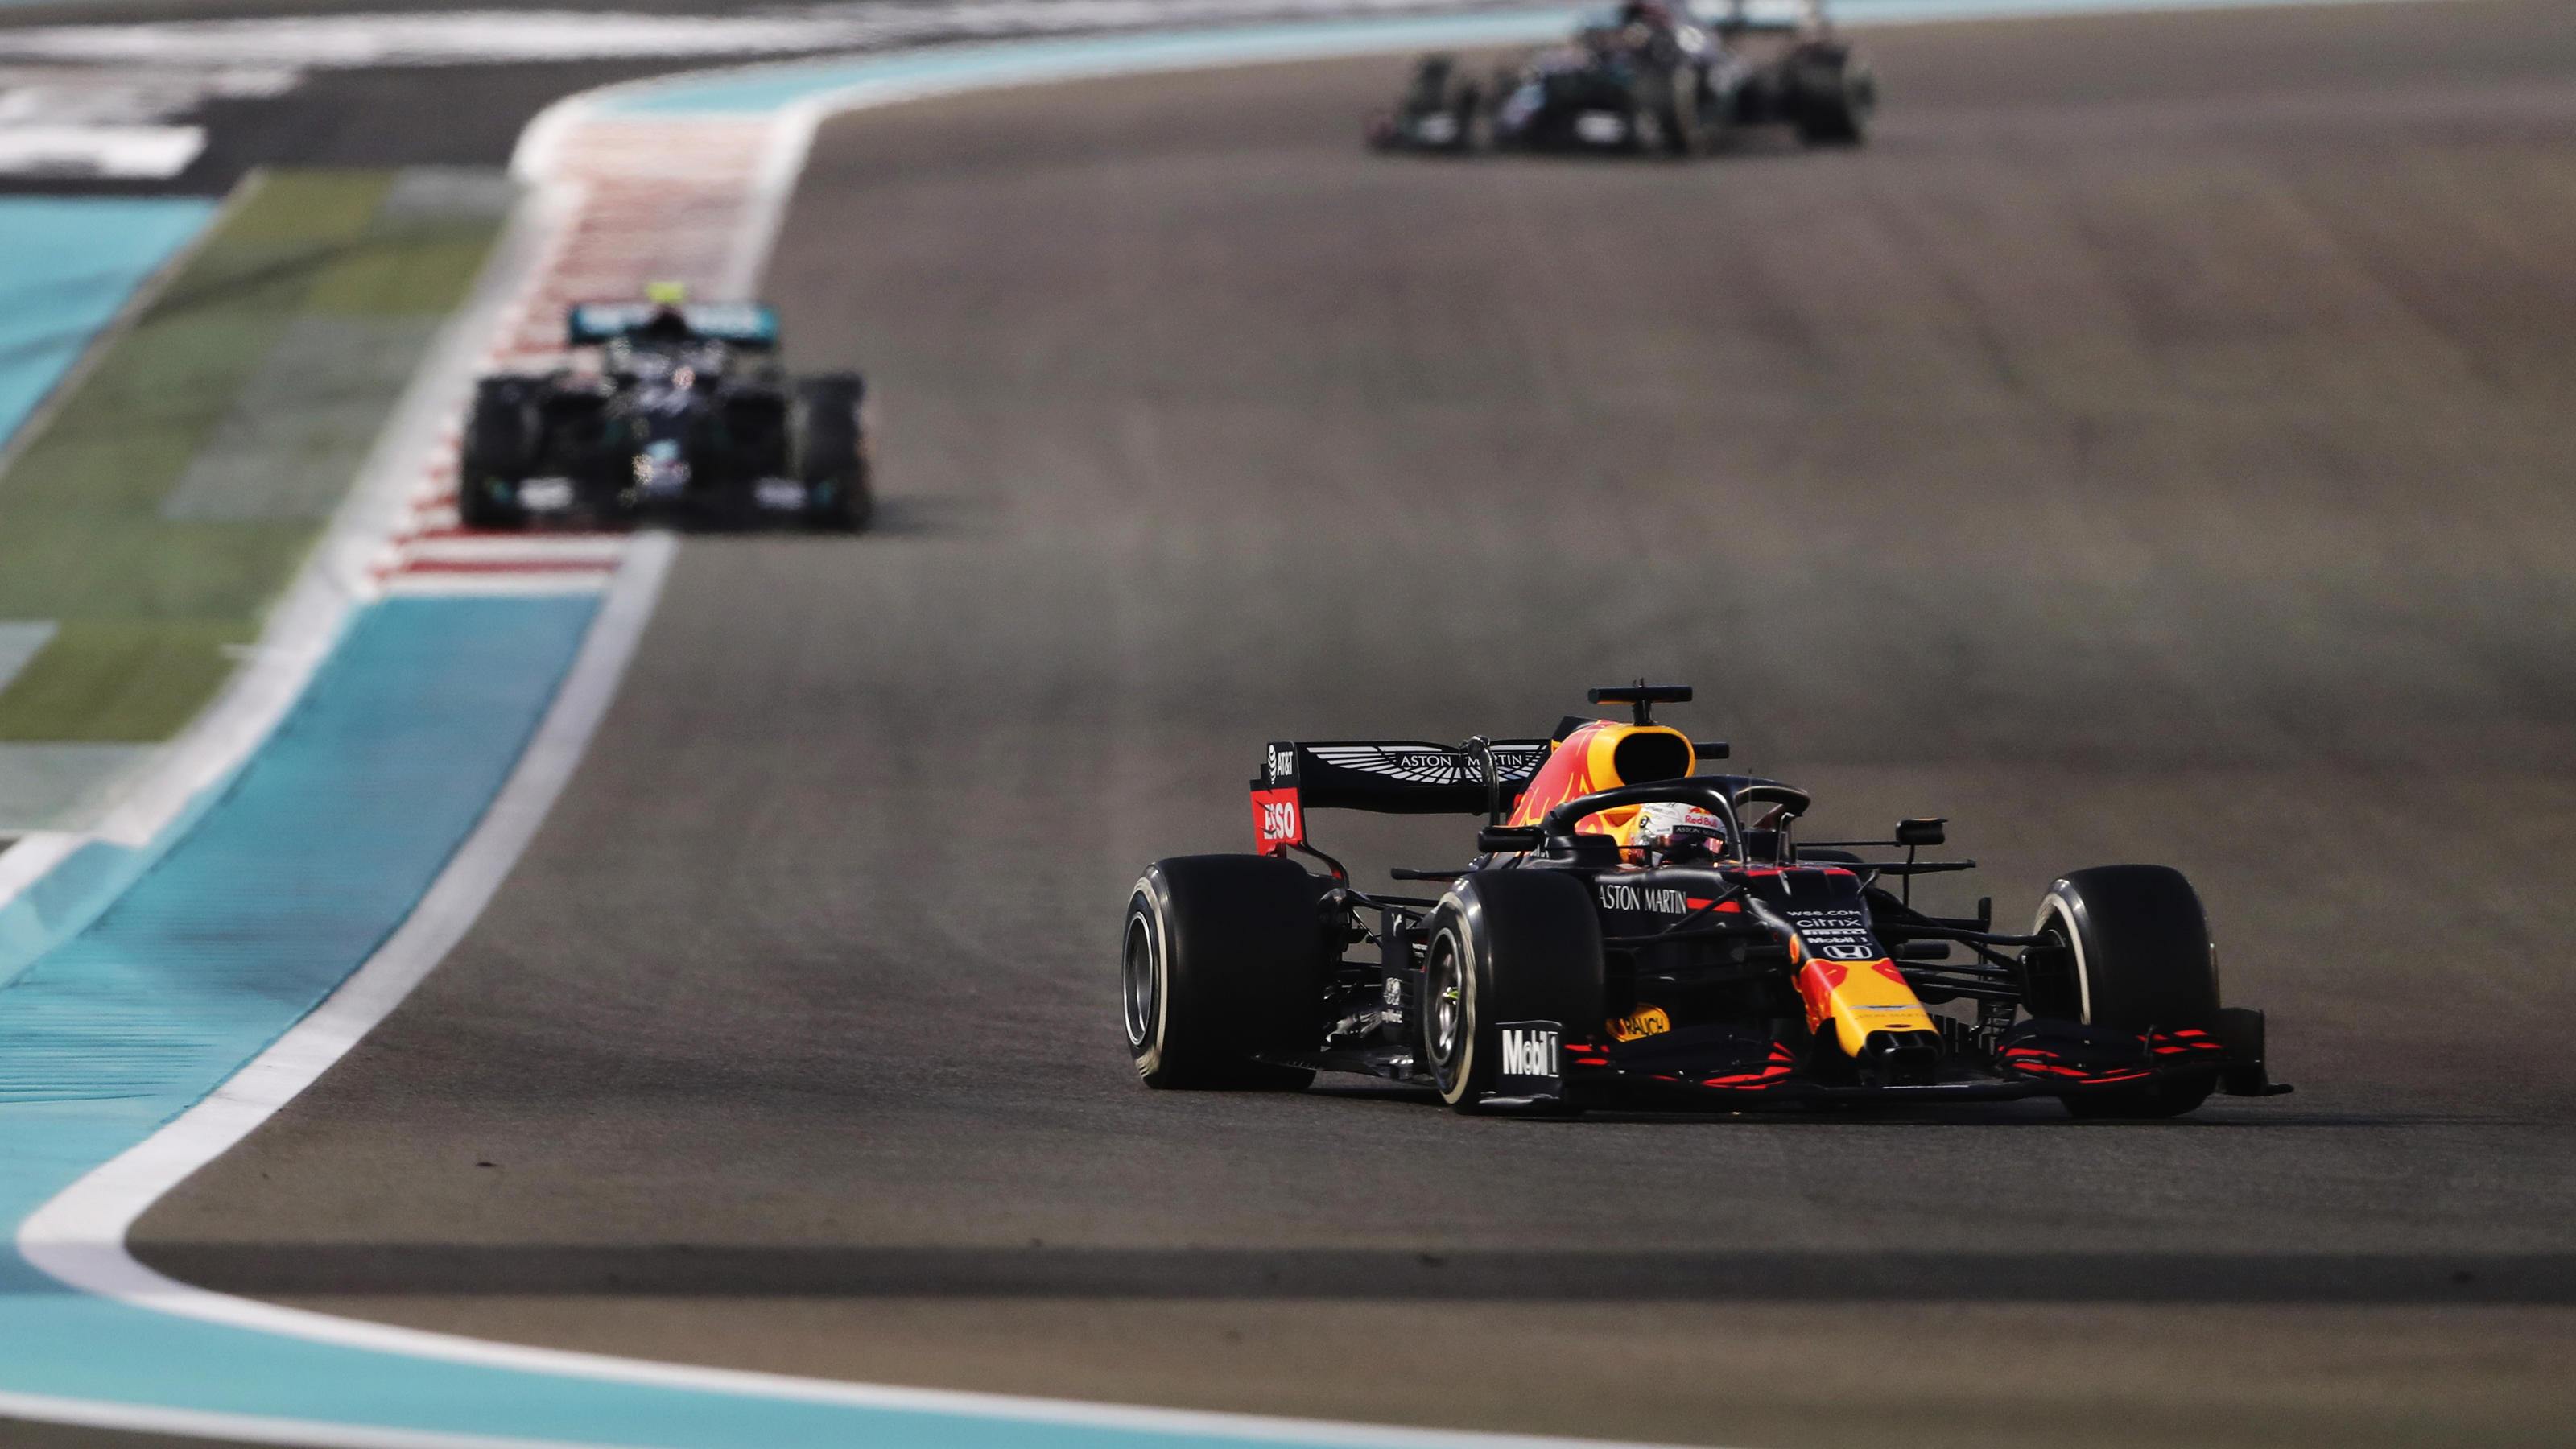 ABU DHABI, UNITED ARAB EMIRATES - DECEMBER 13: Max Verstappen of the Netherlands driving the (33) Aston Martin Red Bull Racing RB16 leads Valtteri Bottas of Finland driving the (77) Mercedes AMG Petronas F1 Team Mercedes W11 during the F1 Grand Prix 